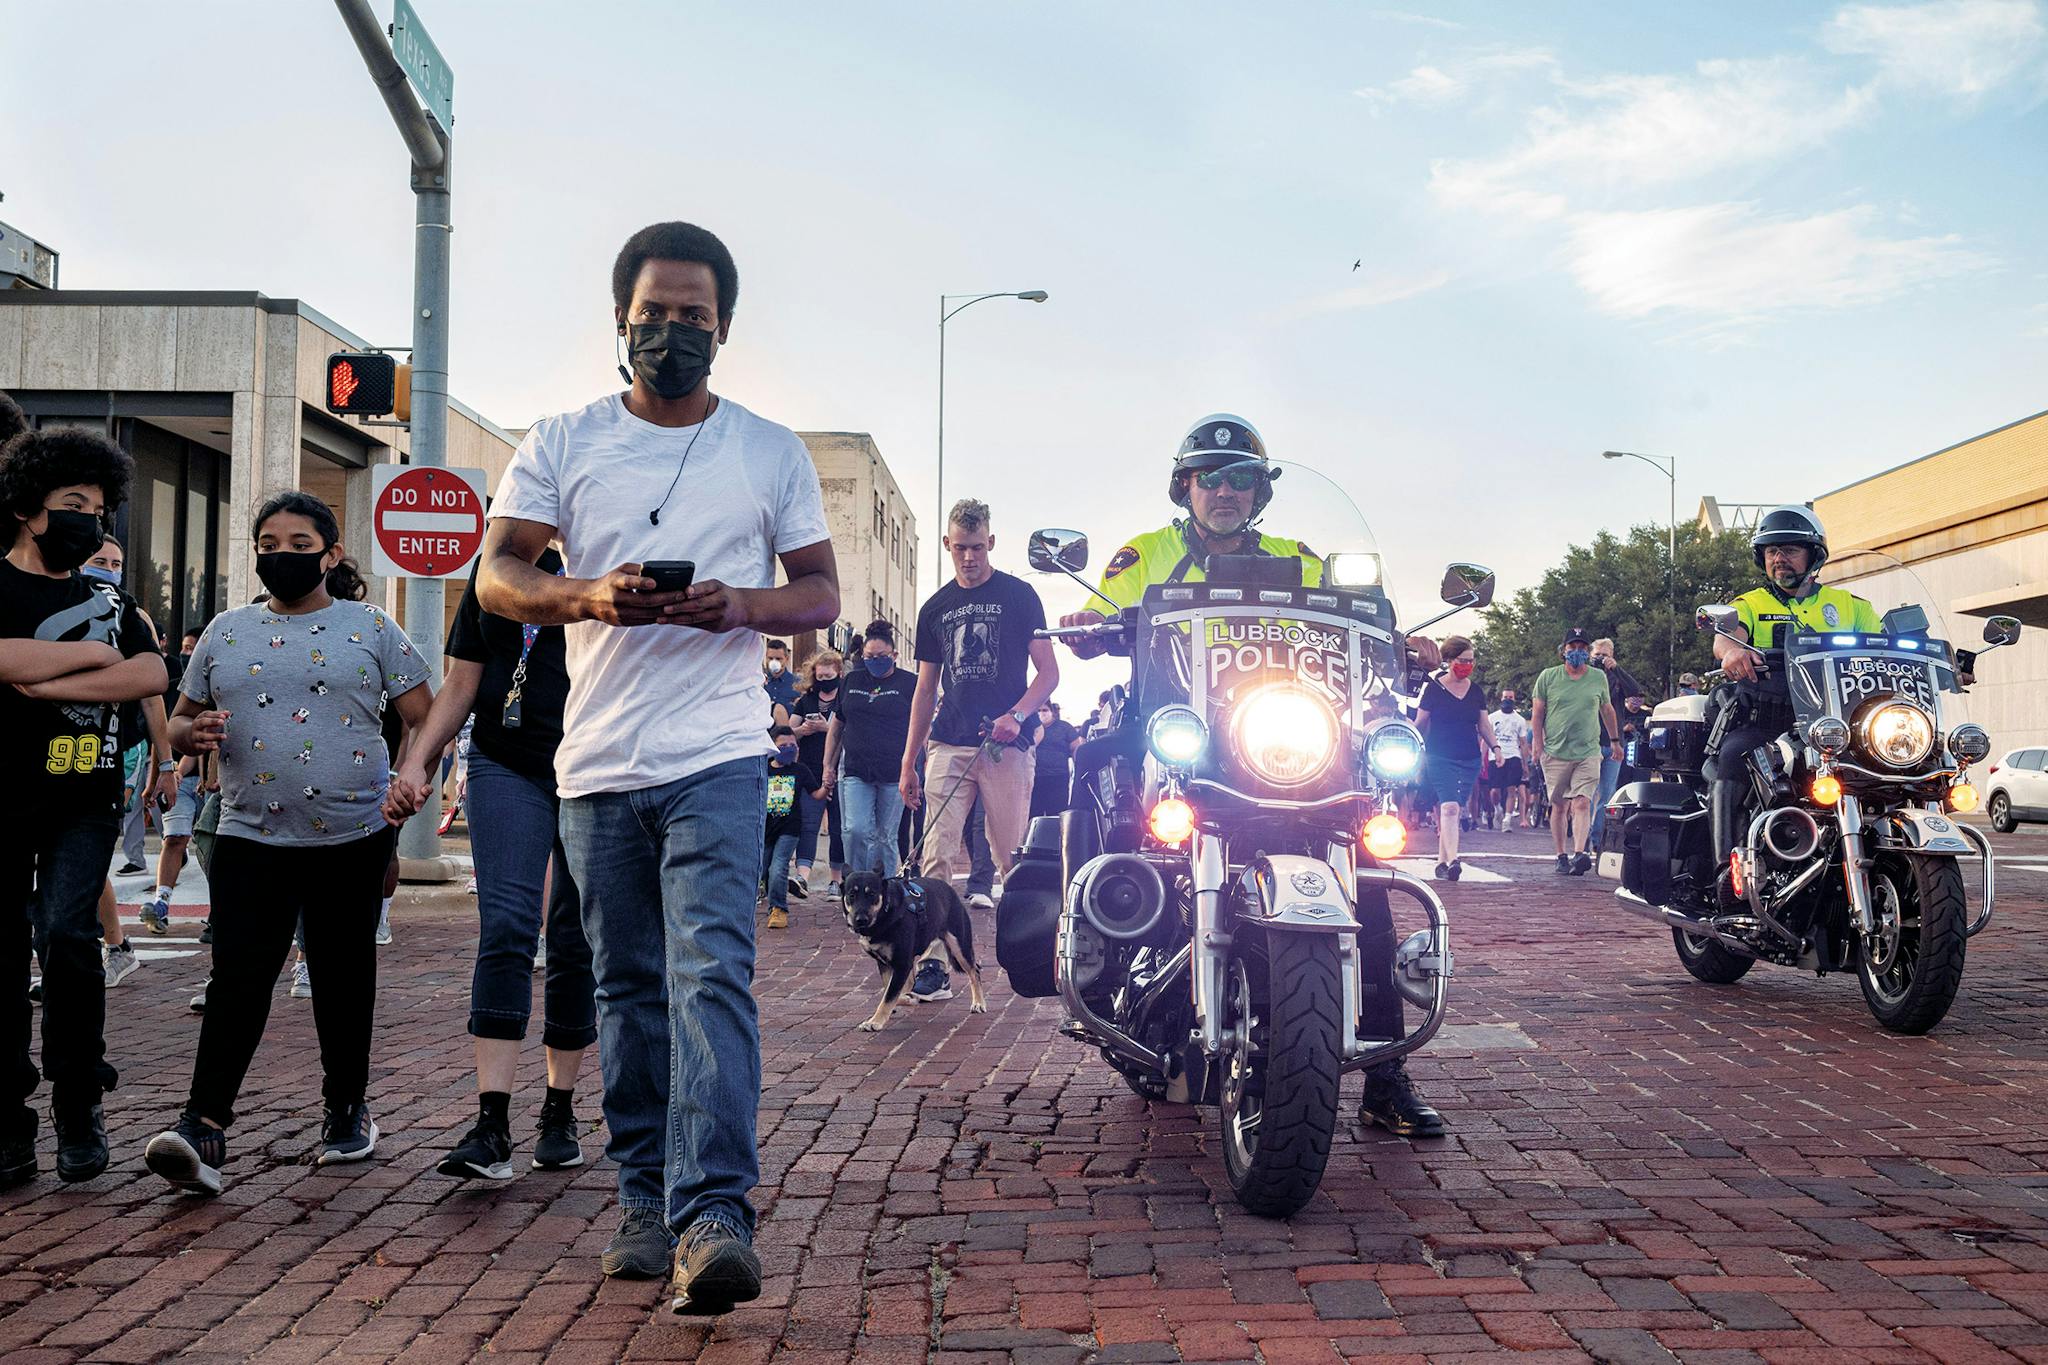 Participants in the 100 Black Men of West Texas solidarity walk are escorted by police officers at 8 p.m. in Lubbock on June 1, 2020.